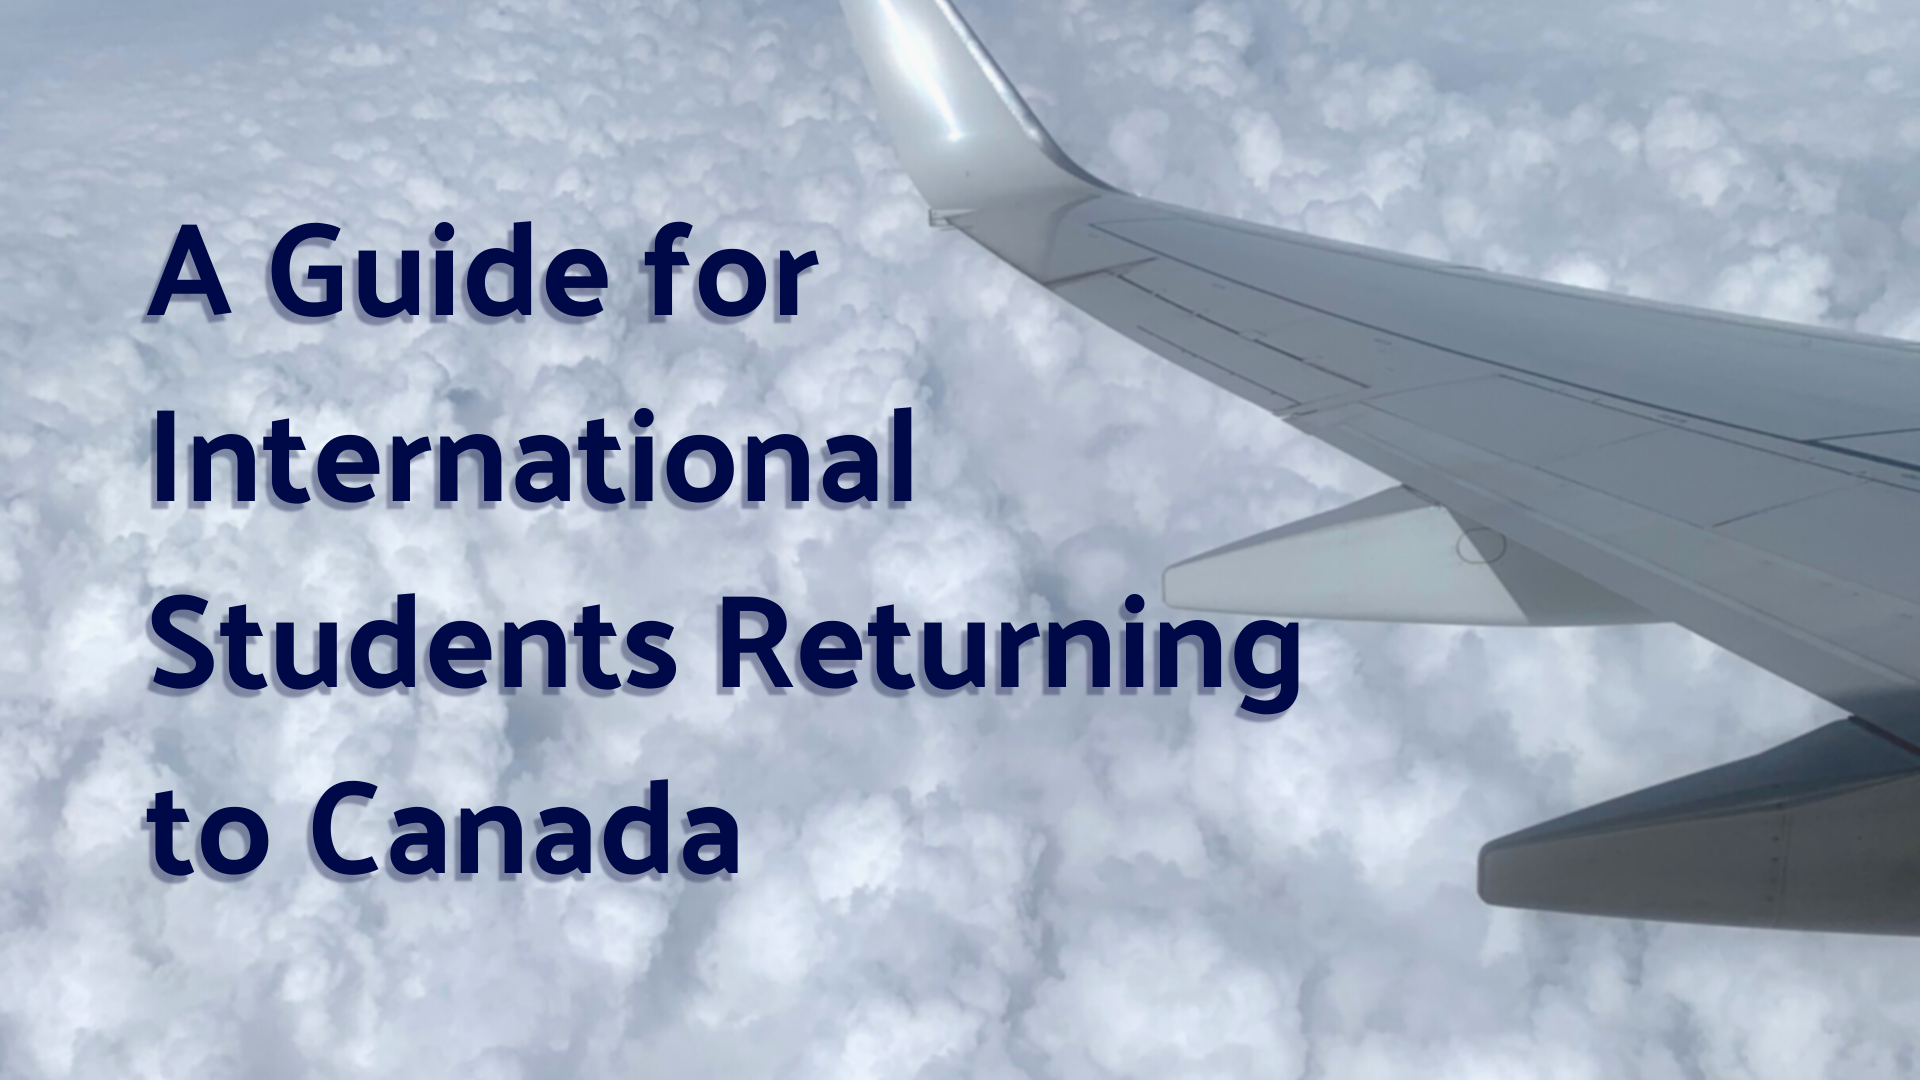 a-guide-for-international-students-returning-to-canada-header.png